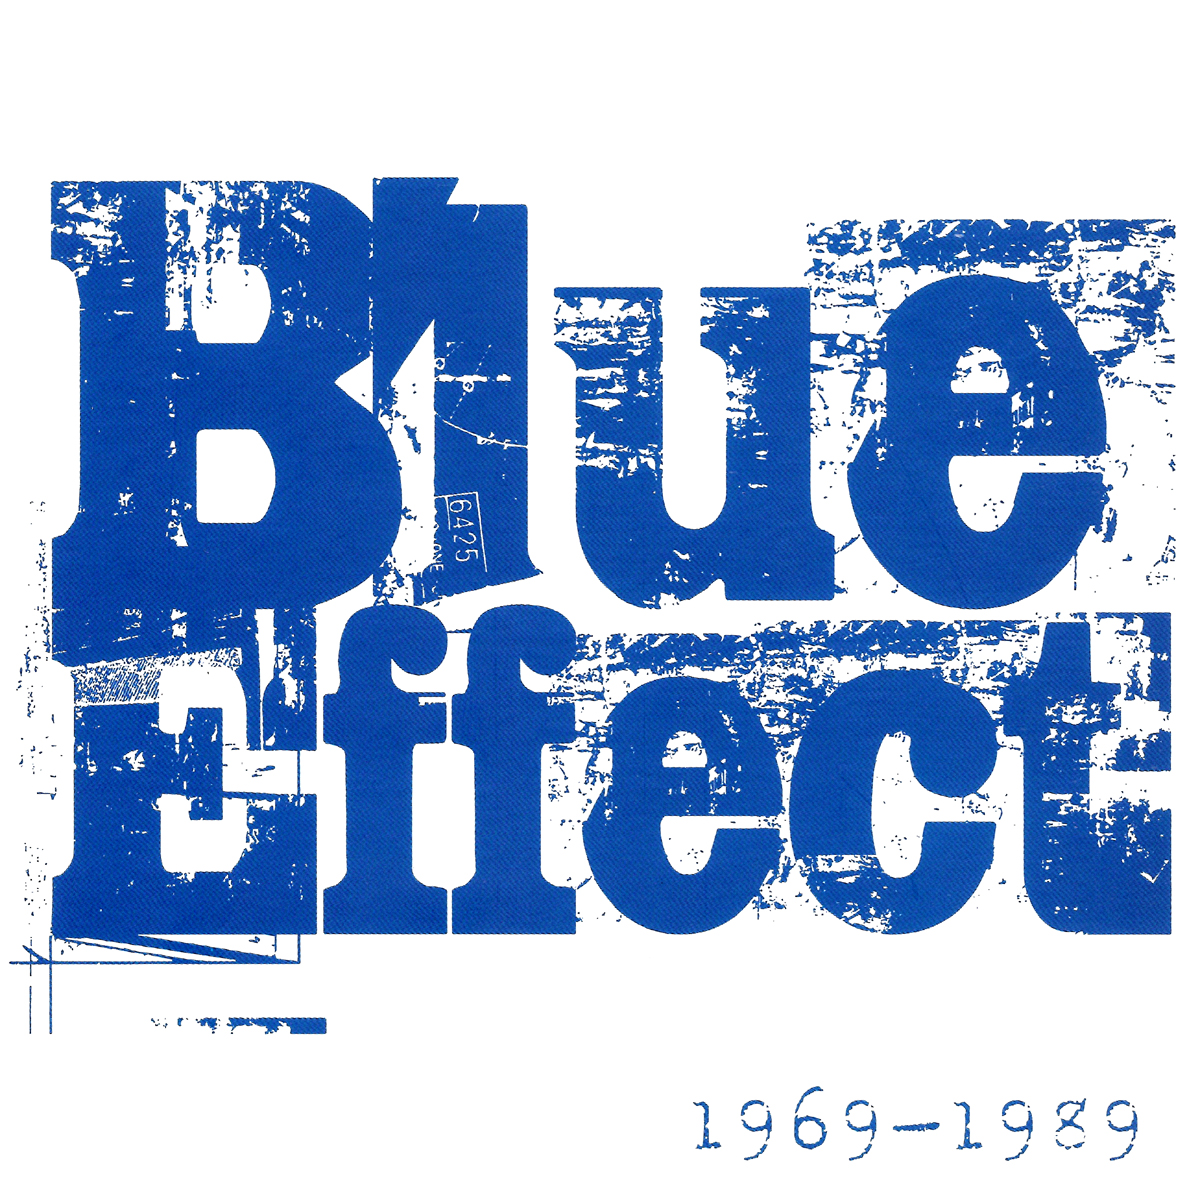 THE BLUE EFFECT - 1969-1989  1